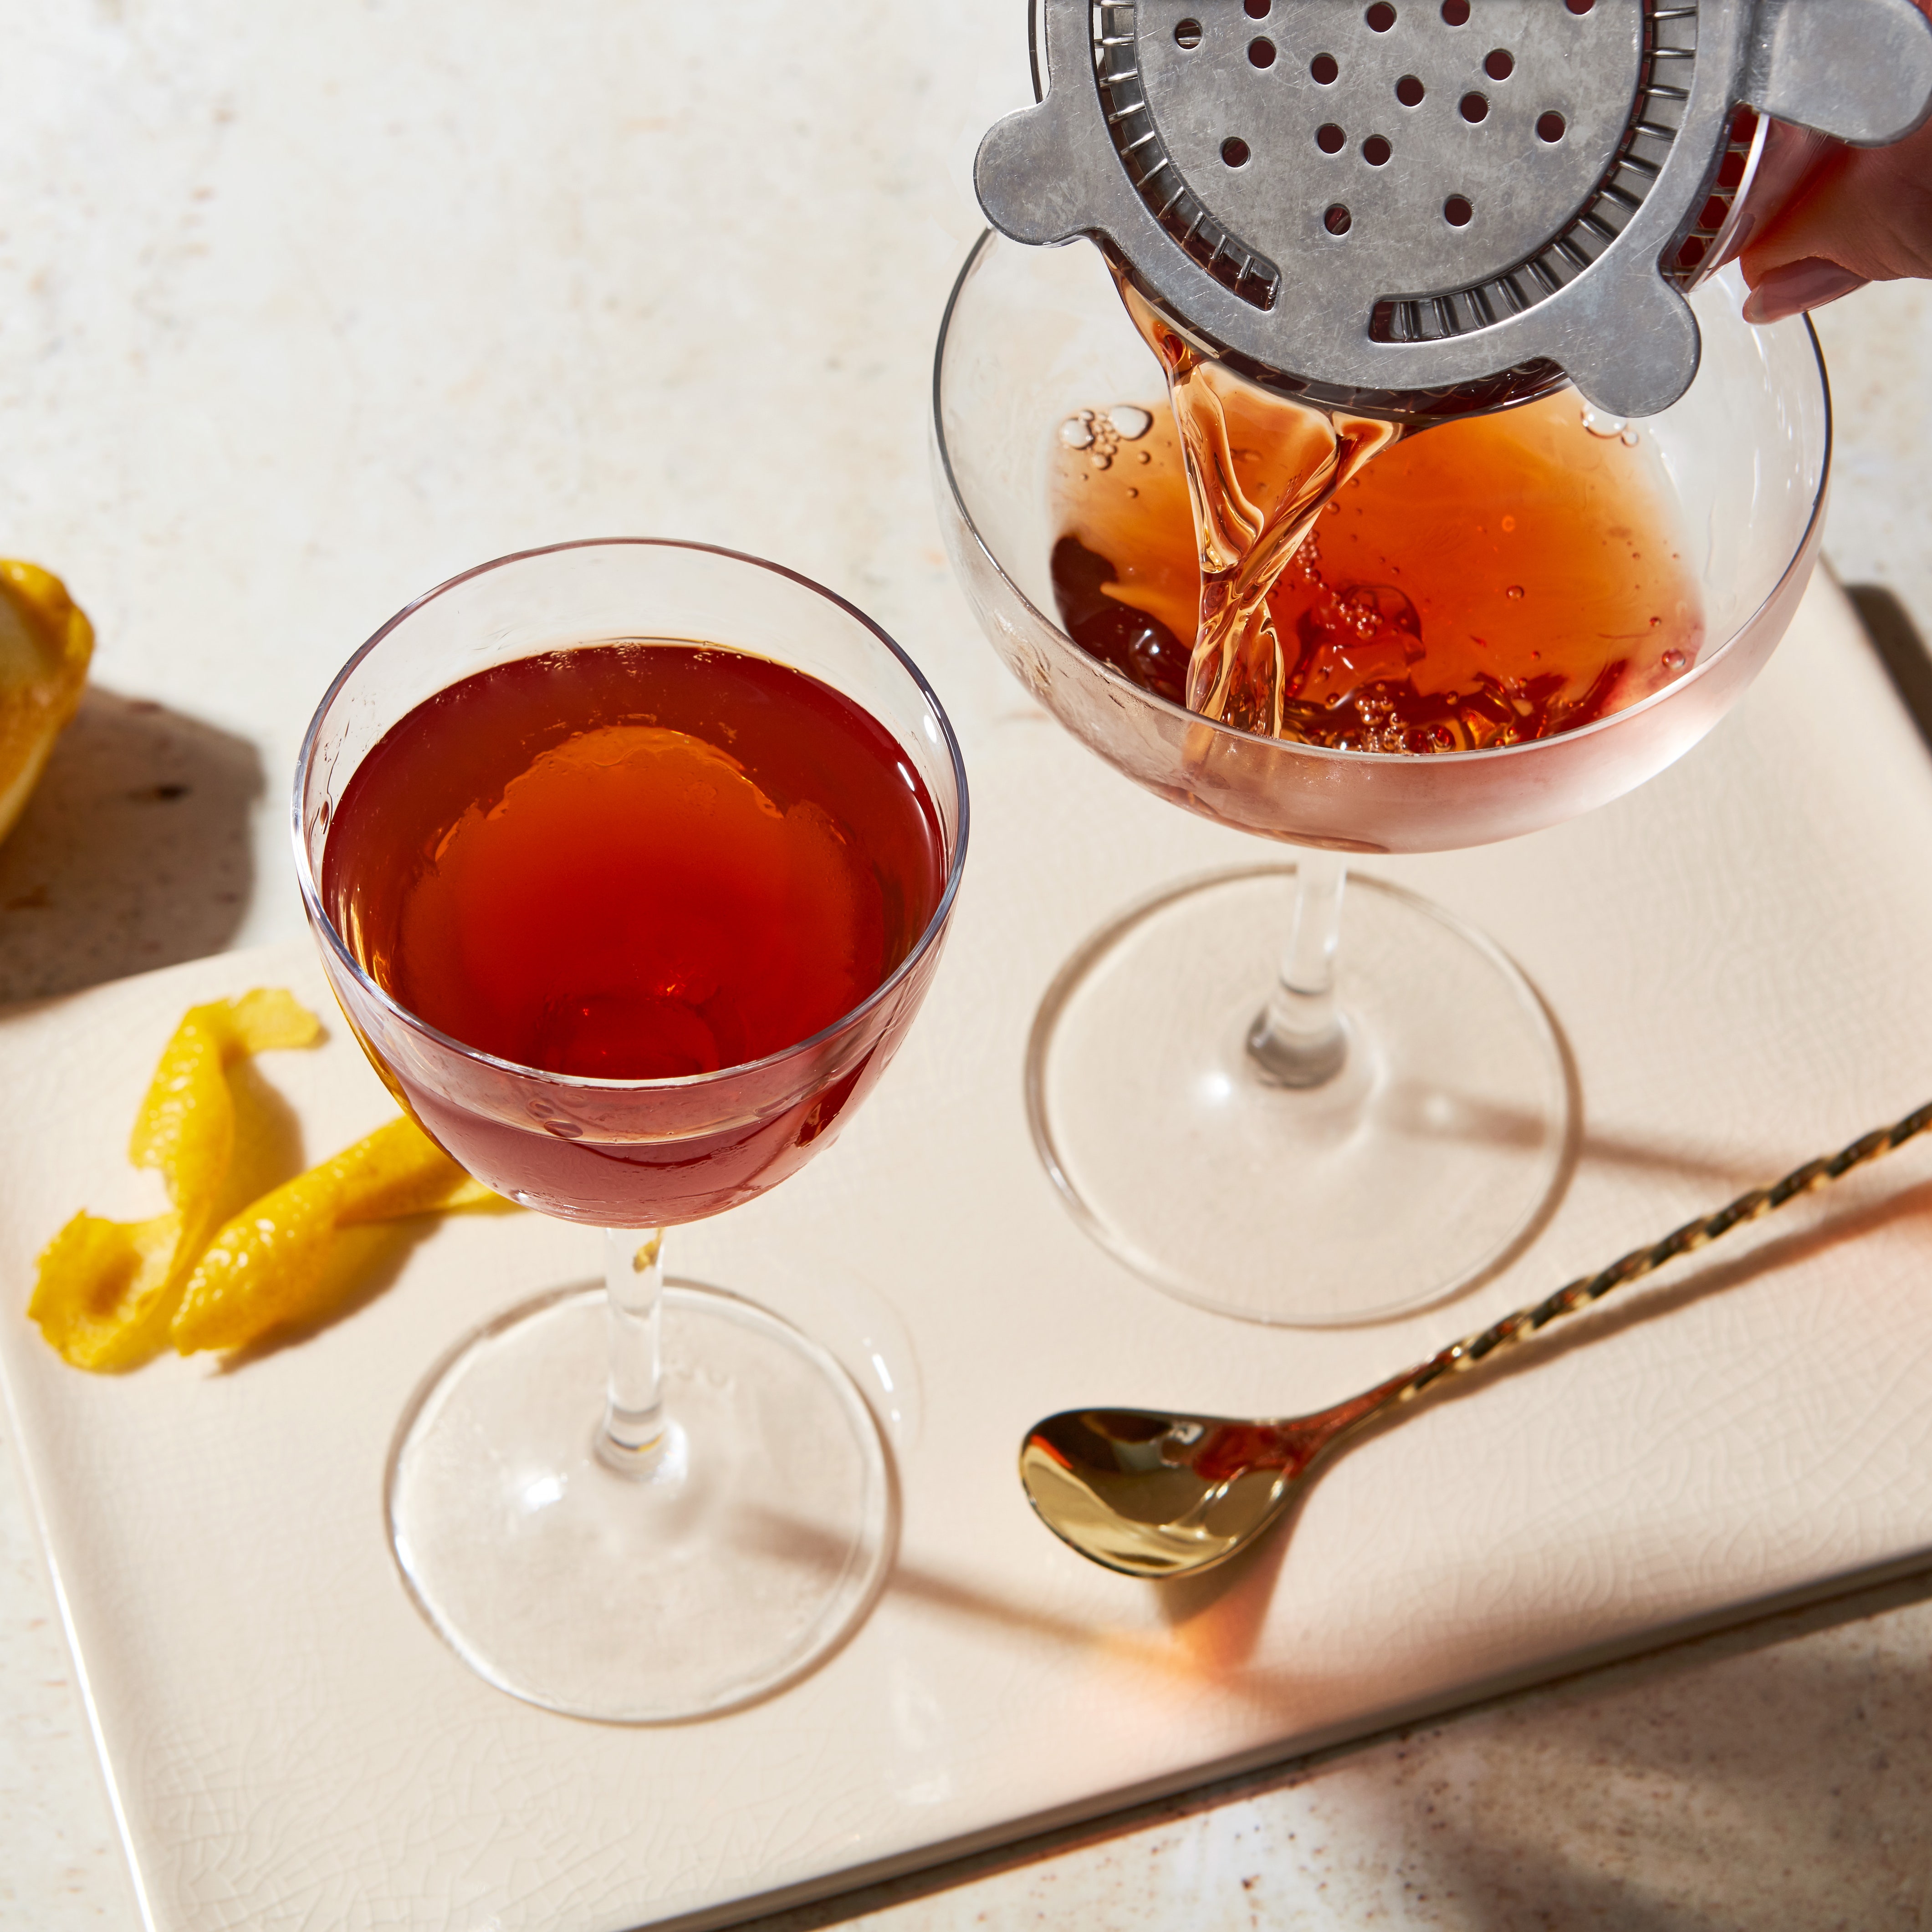 Yes, Scotch Belongs in Cocktails